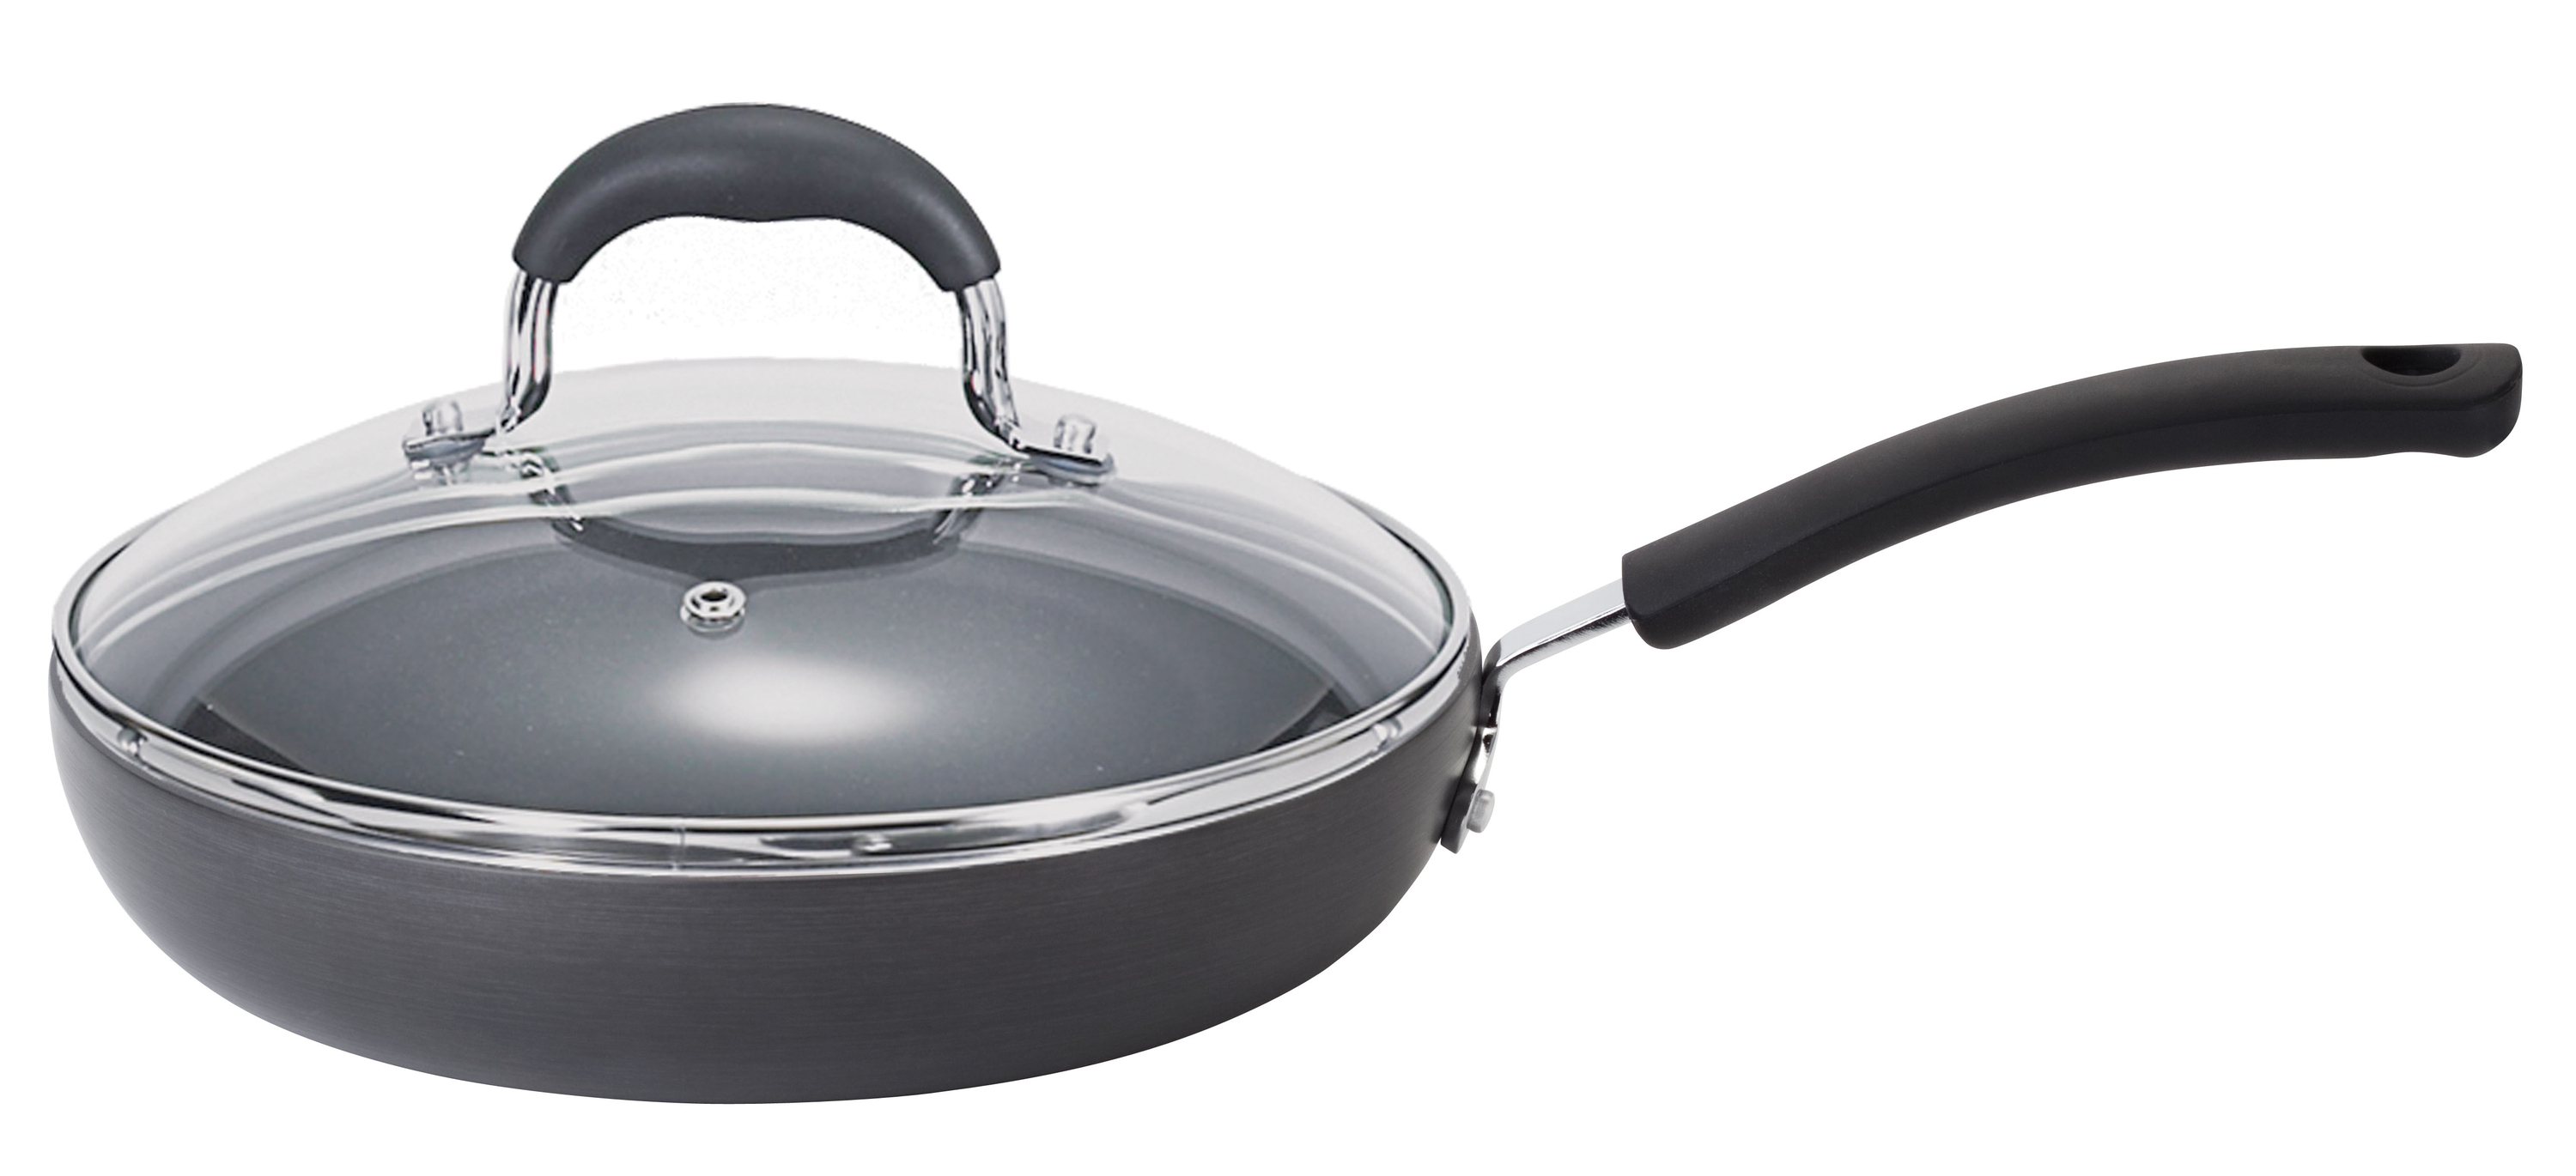 T-fal Ultimate Hard Anodized Non-Stick Cookware, 10 inch Deep Fry Pan, Black - image 1 of 6